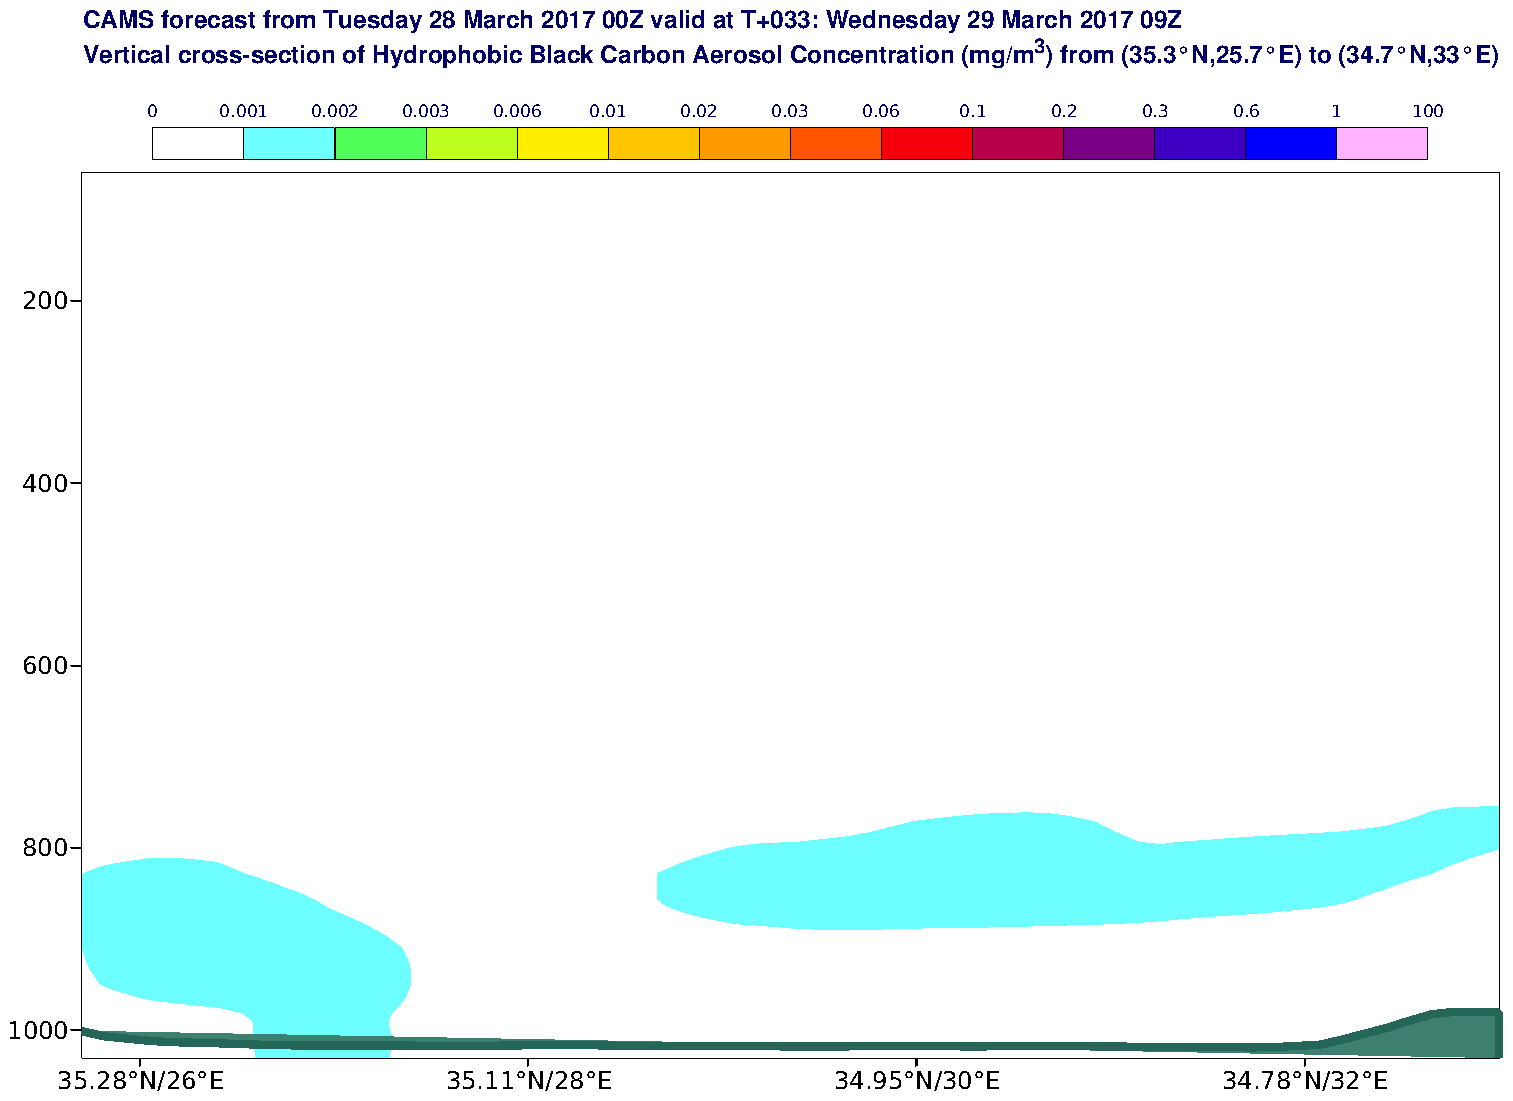 Vertical cross-section of Hydrophobic Black Carbon Aerosol Concentration (mg/m3) valid at T33 - 2017-03-29 09:00